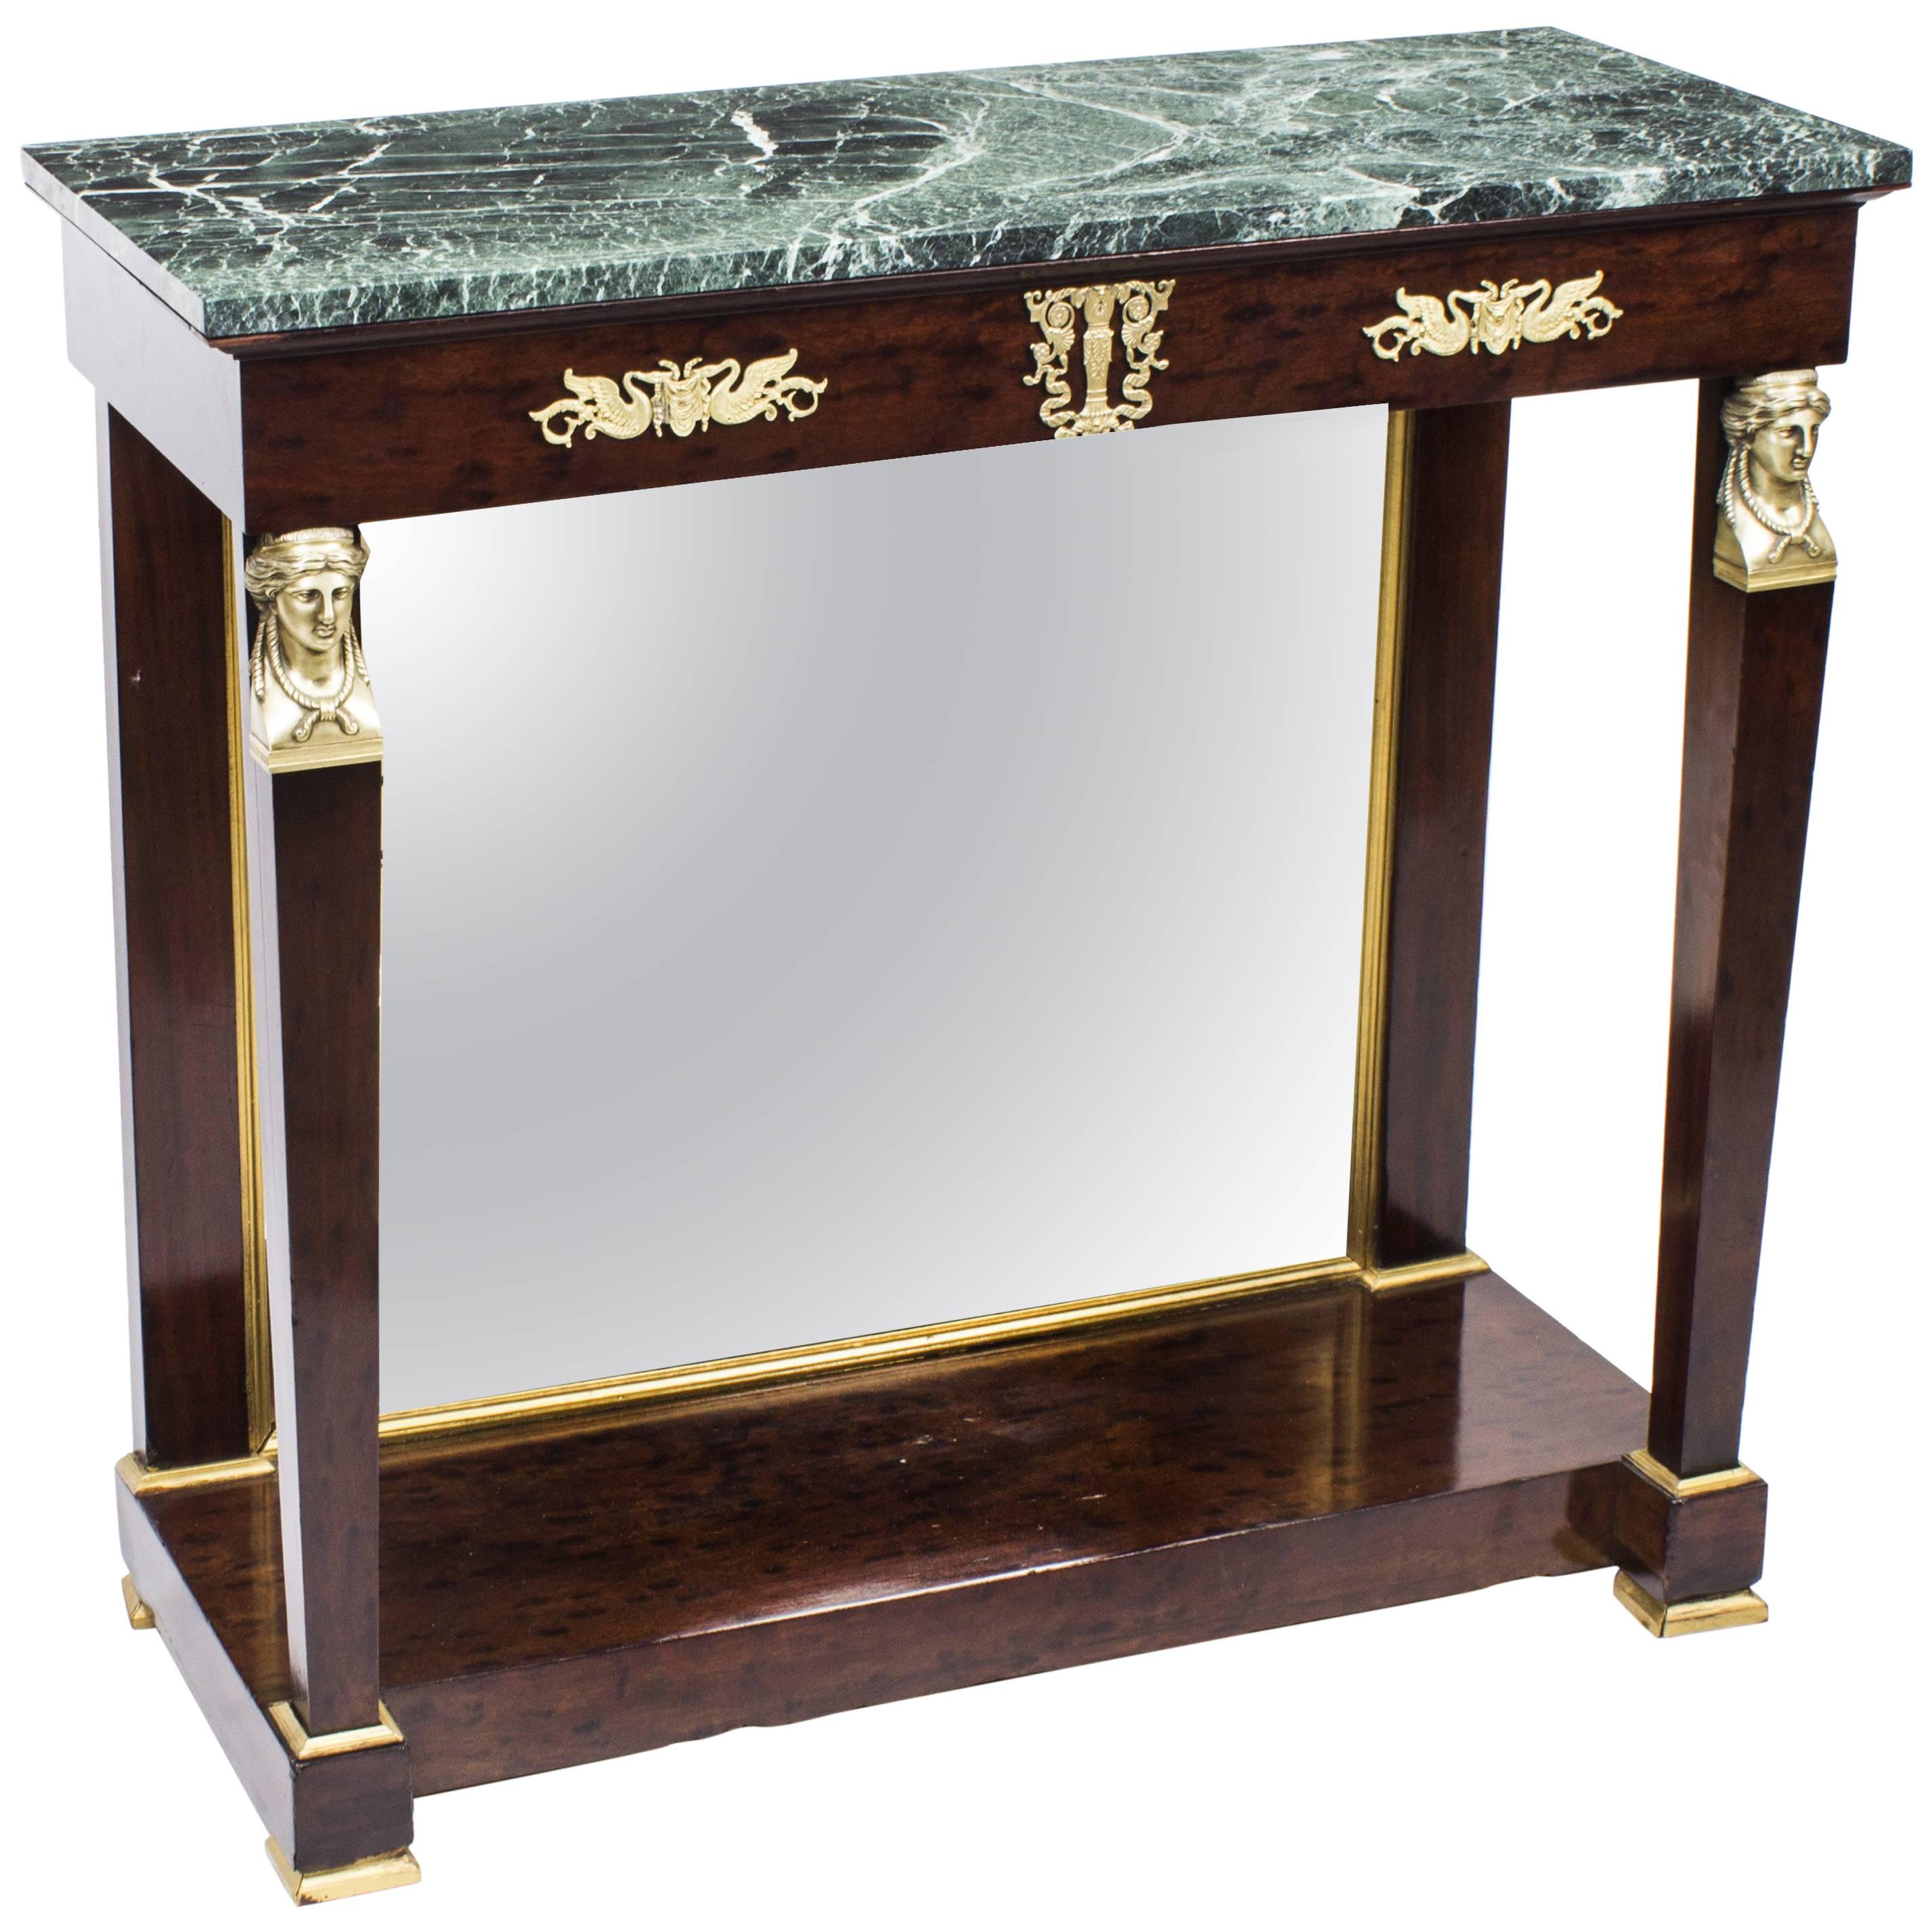 Antique French Empire Marble-Top and Ormolu Console Table, circa 1810